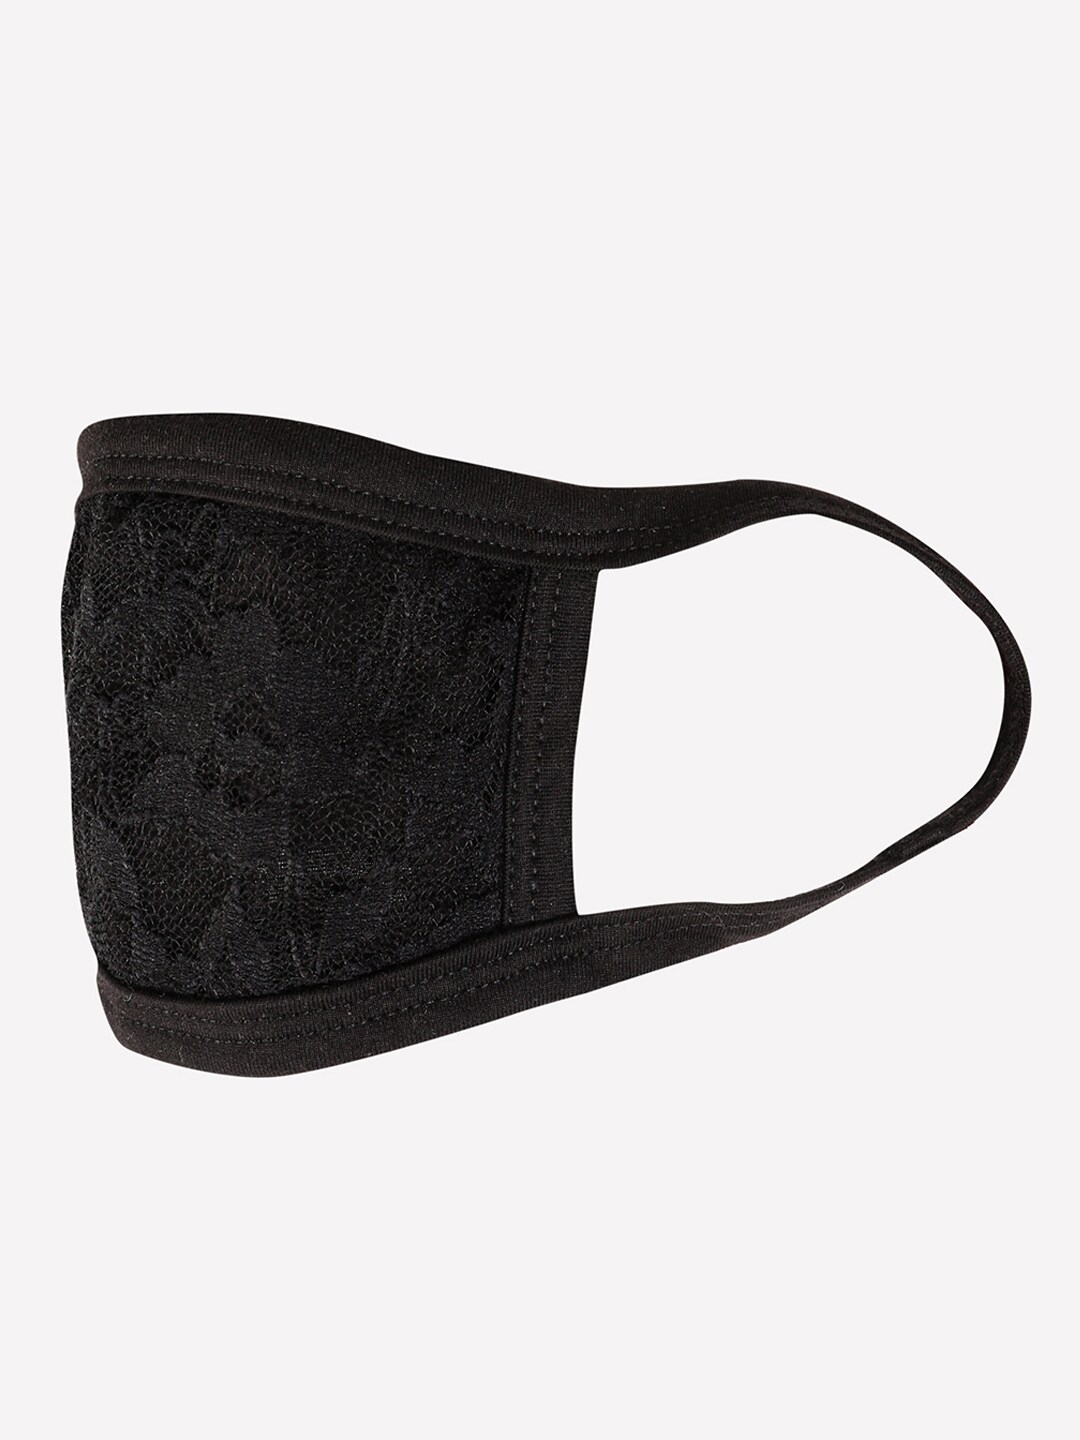 Skidlers Women Black 2-Ply Reusable Outdoor Mask Price in India